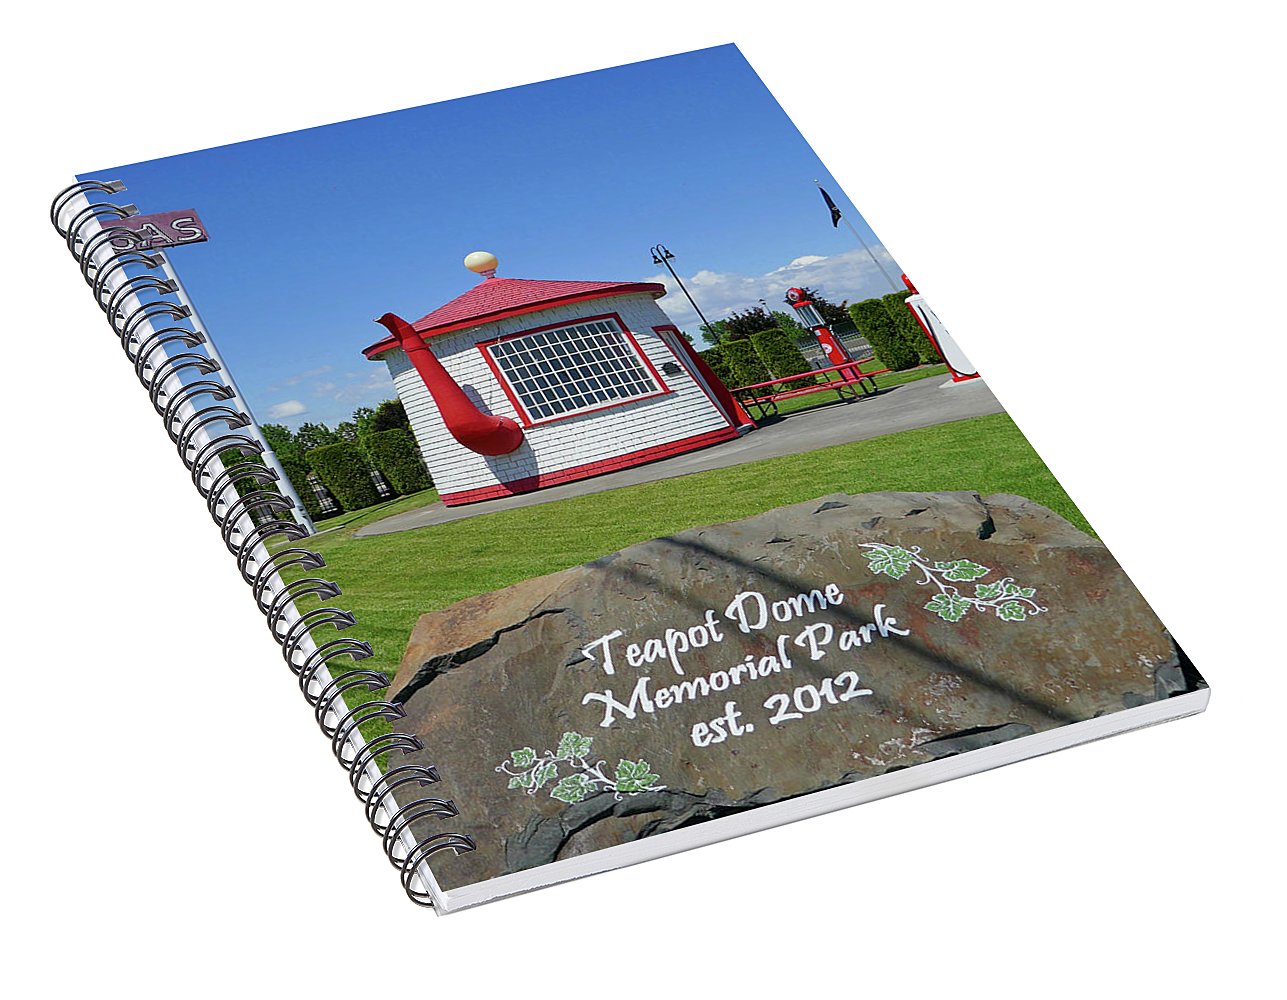 Teapot Dome Memorial Park - Spiral Notebook - Fry1Productions